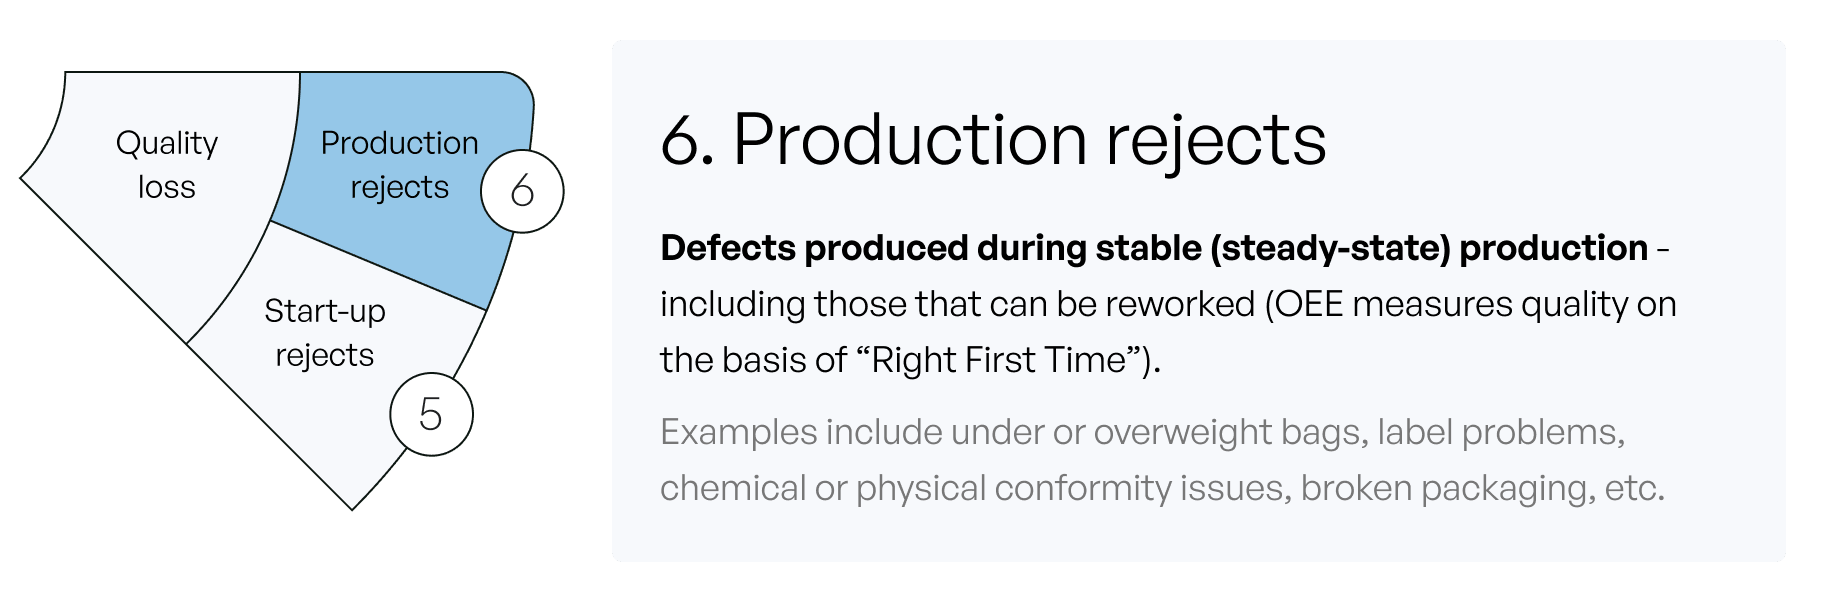 production rejects are defects produced during stable production